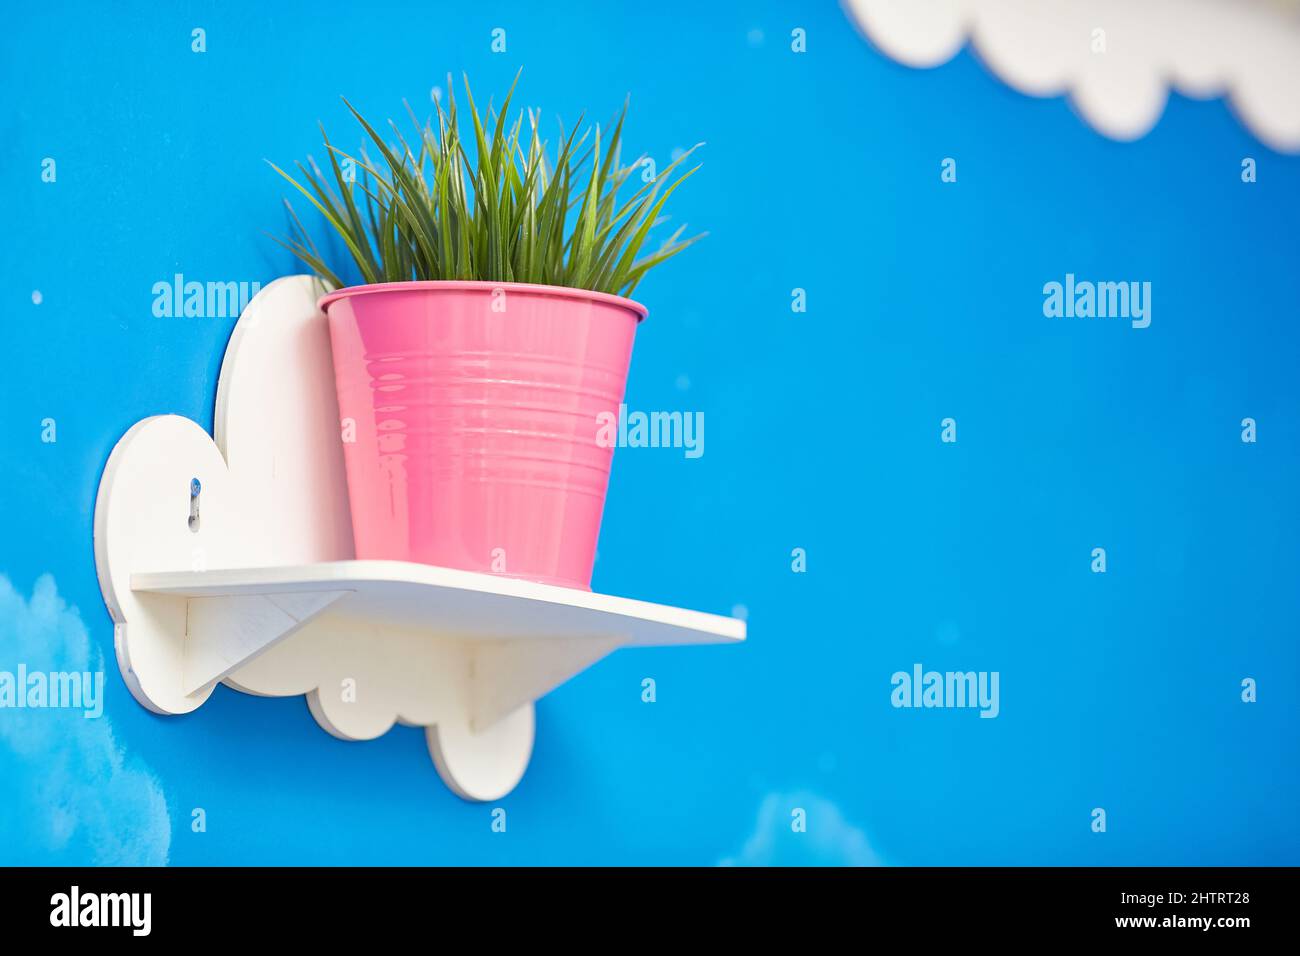 Interior decor. pink flower pot with green plant on white wooden shelf Stock Photo